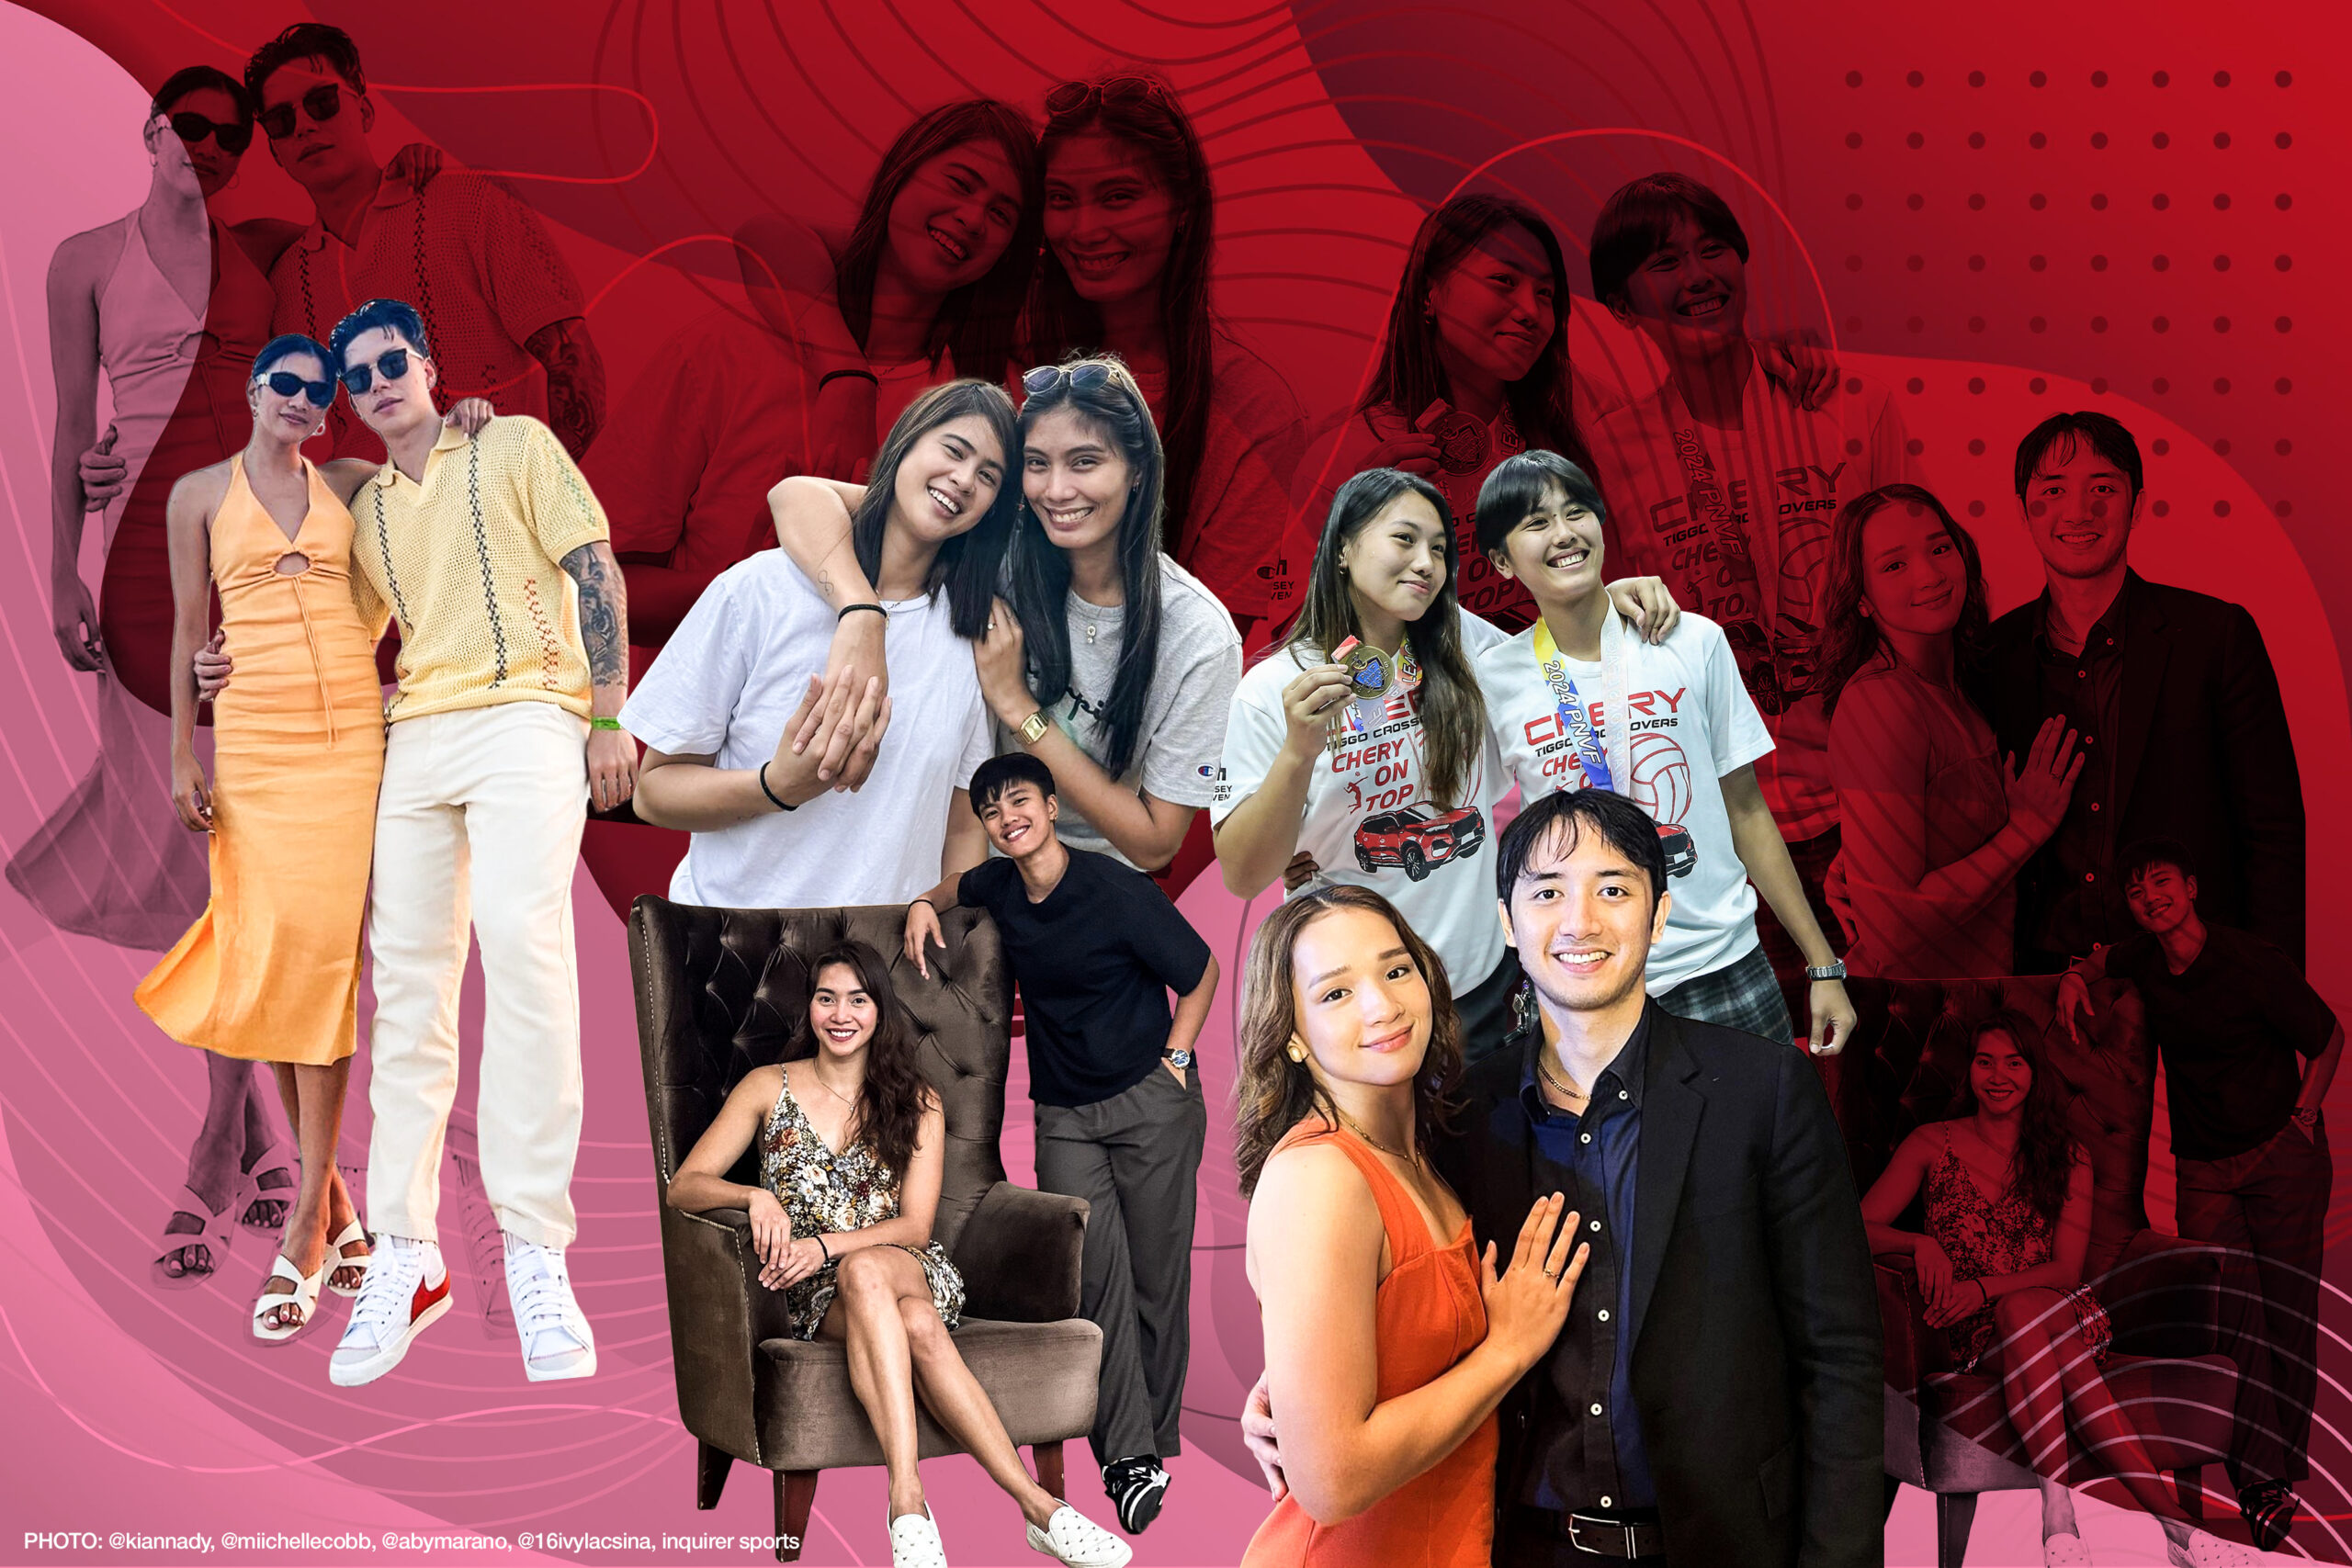 Kim Dy and Dwight Ramos, Ivy Lacsina and Deanna Wong, Aby Marano and Camille Kal, Shaya Adordor and Jasmine Nabor and Michelle Cob and Vito Sotto.